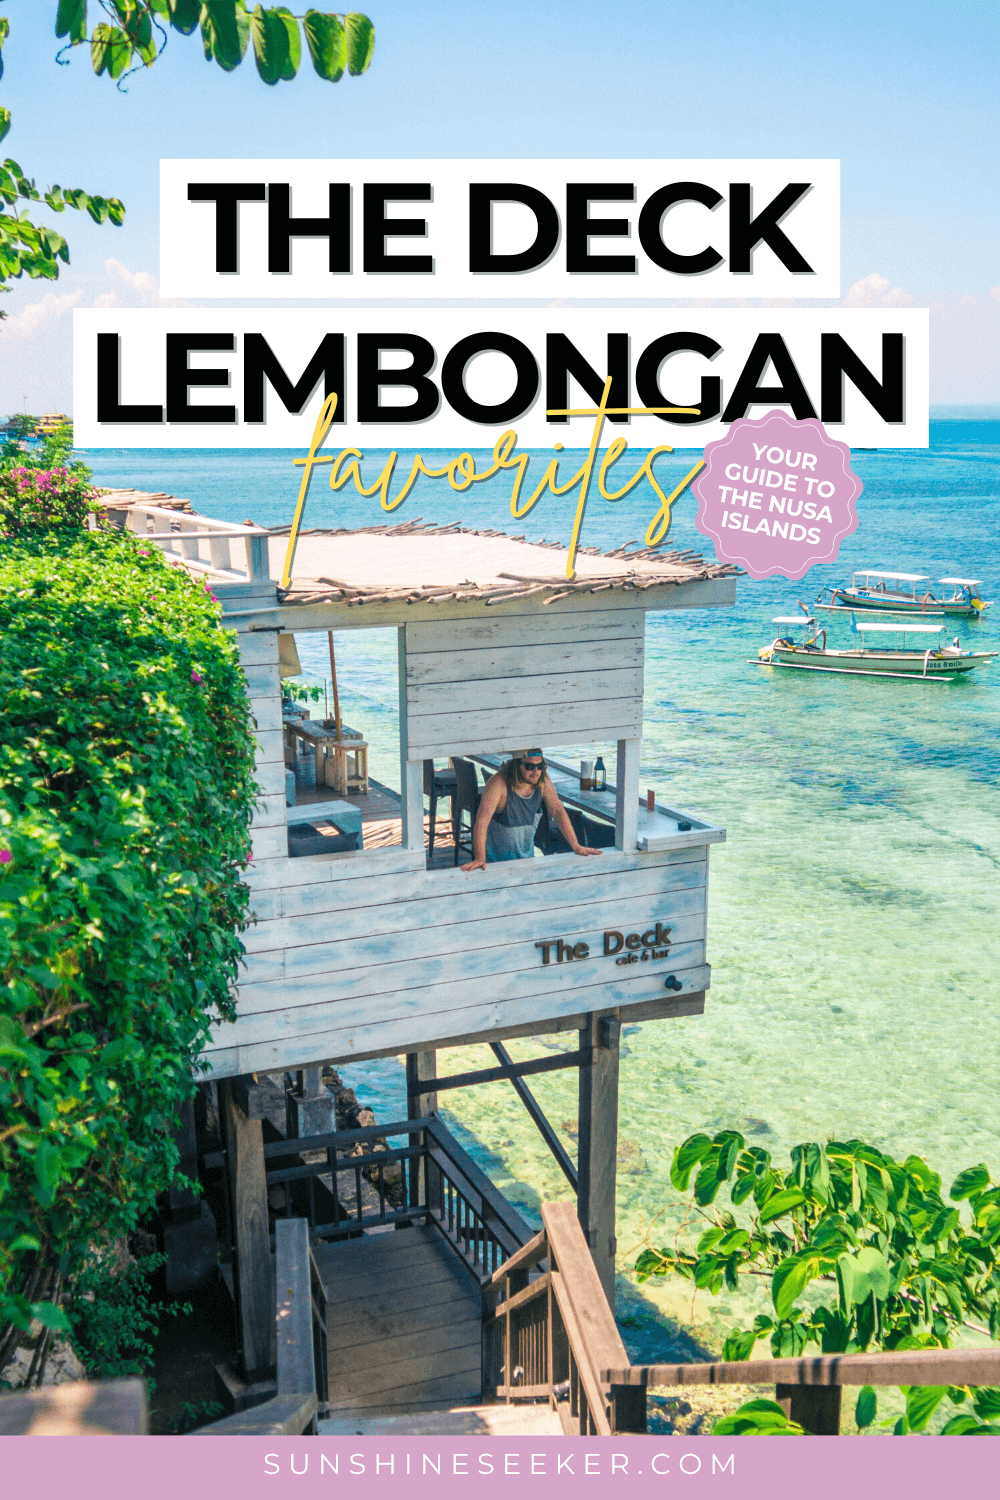 The Deck, one of my favorites on Nusa Lembongan. Just 30 minutes from Bali. Go paddleboarding and enjoy cocktails in on of the most Instagrammable places in Indonesia.